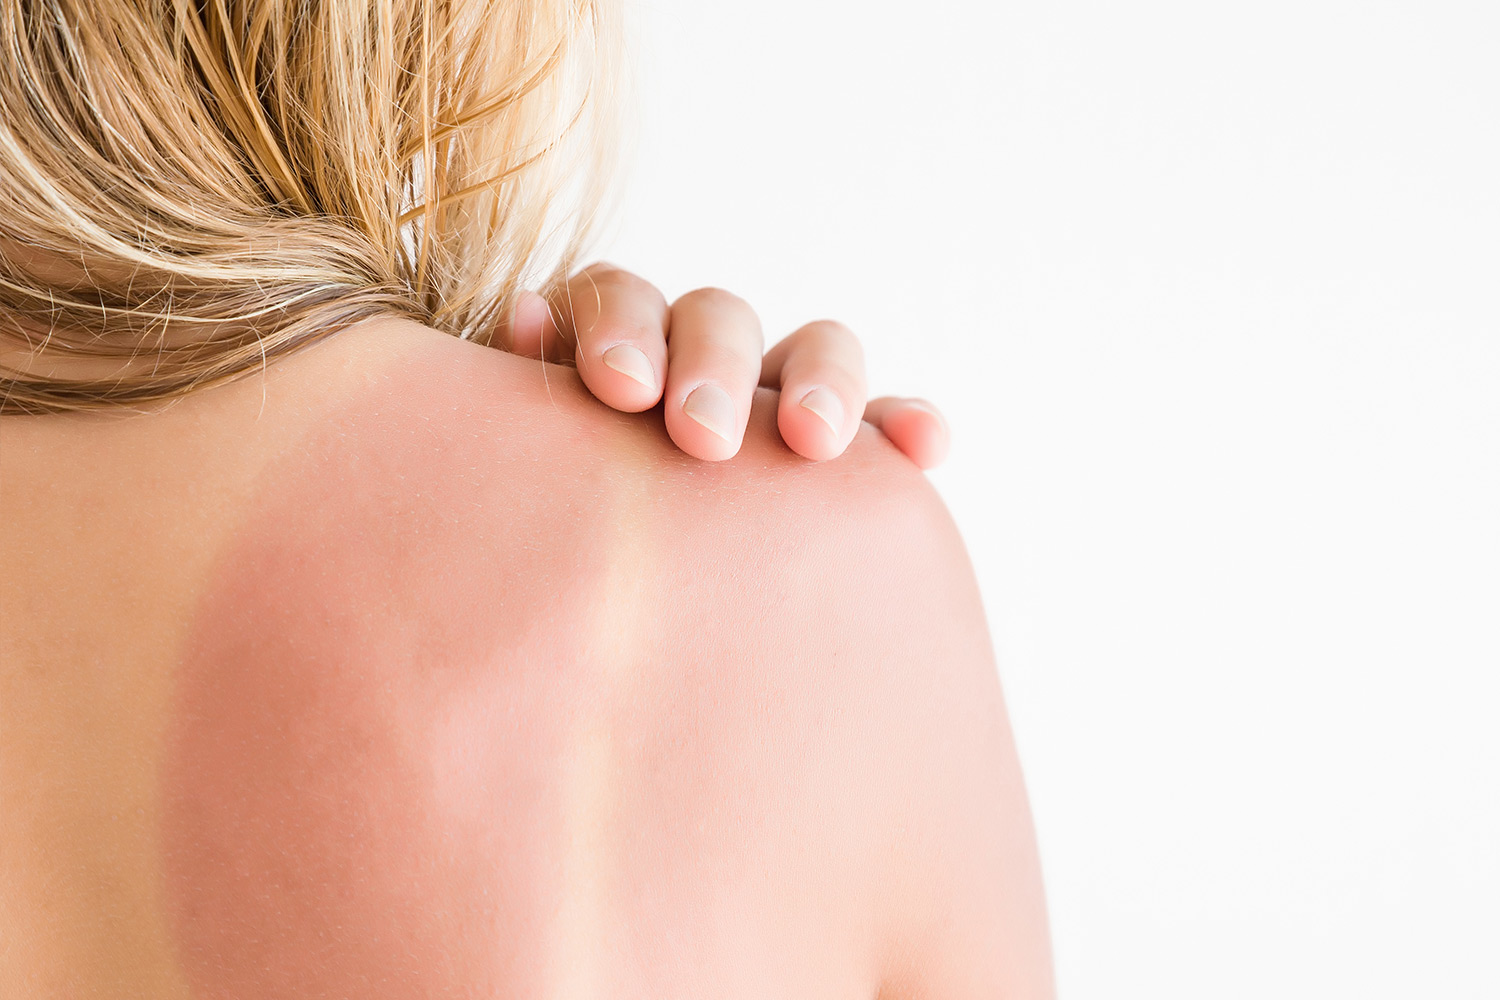 What damage does the sun do to our skin?